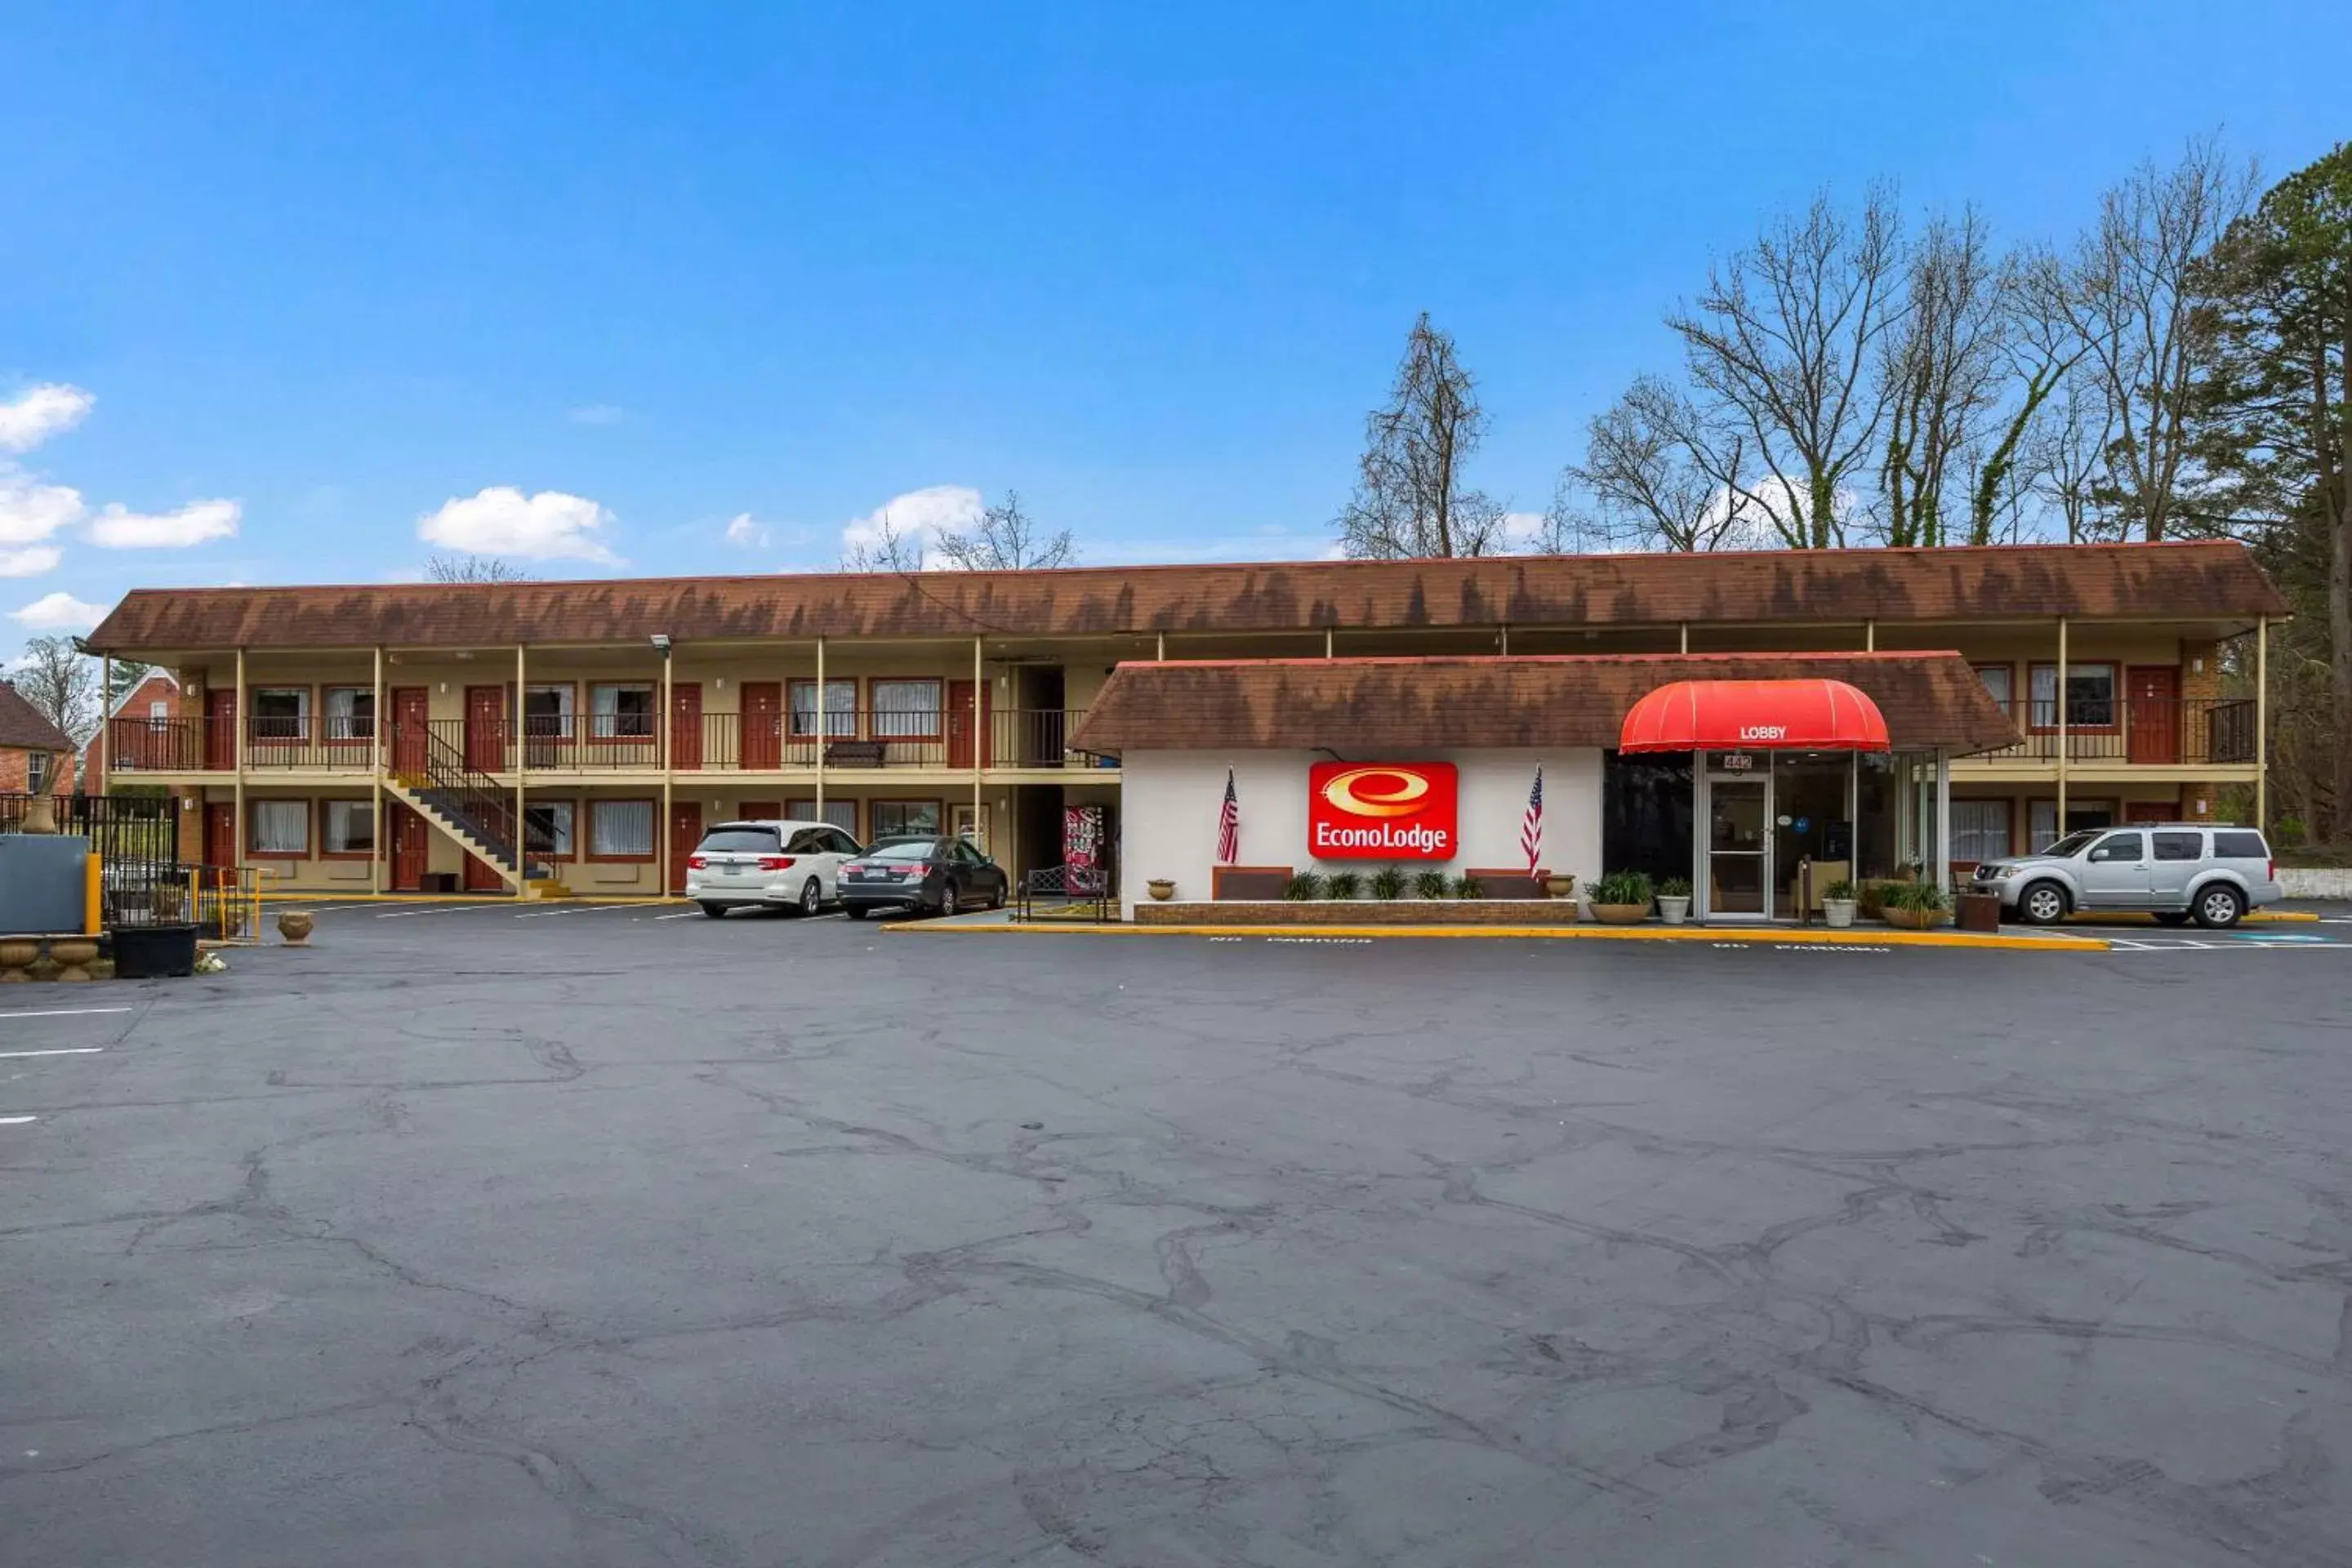 Property Building in Econolodge Historic